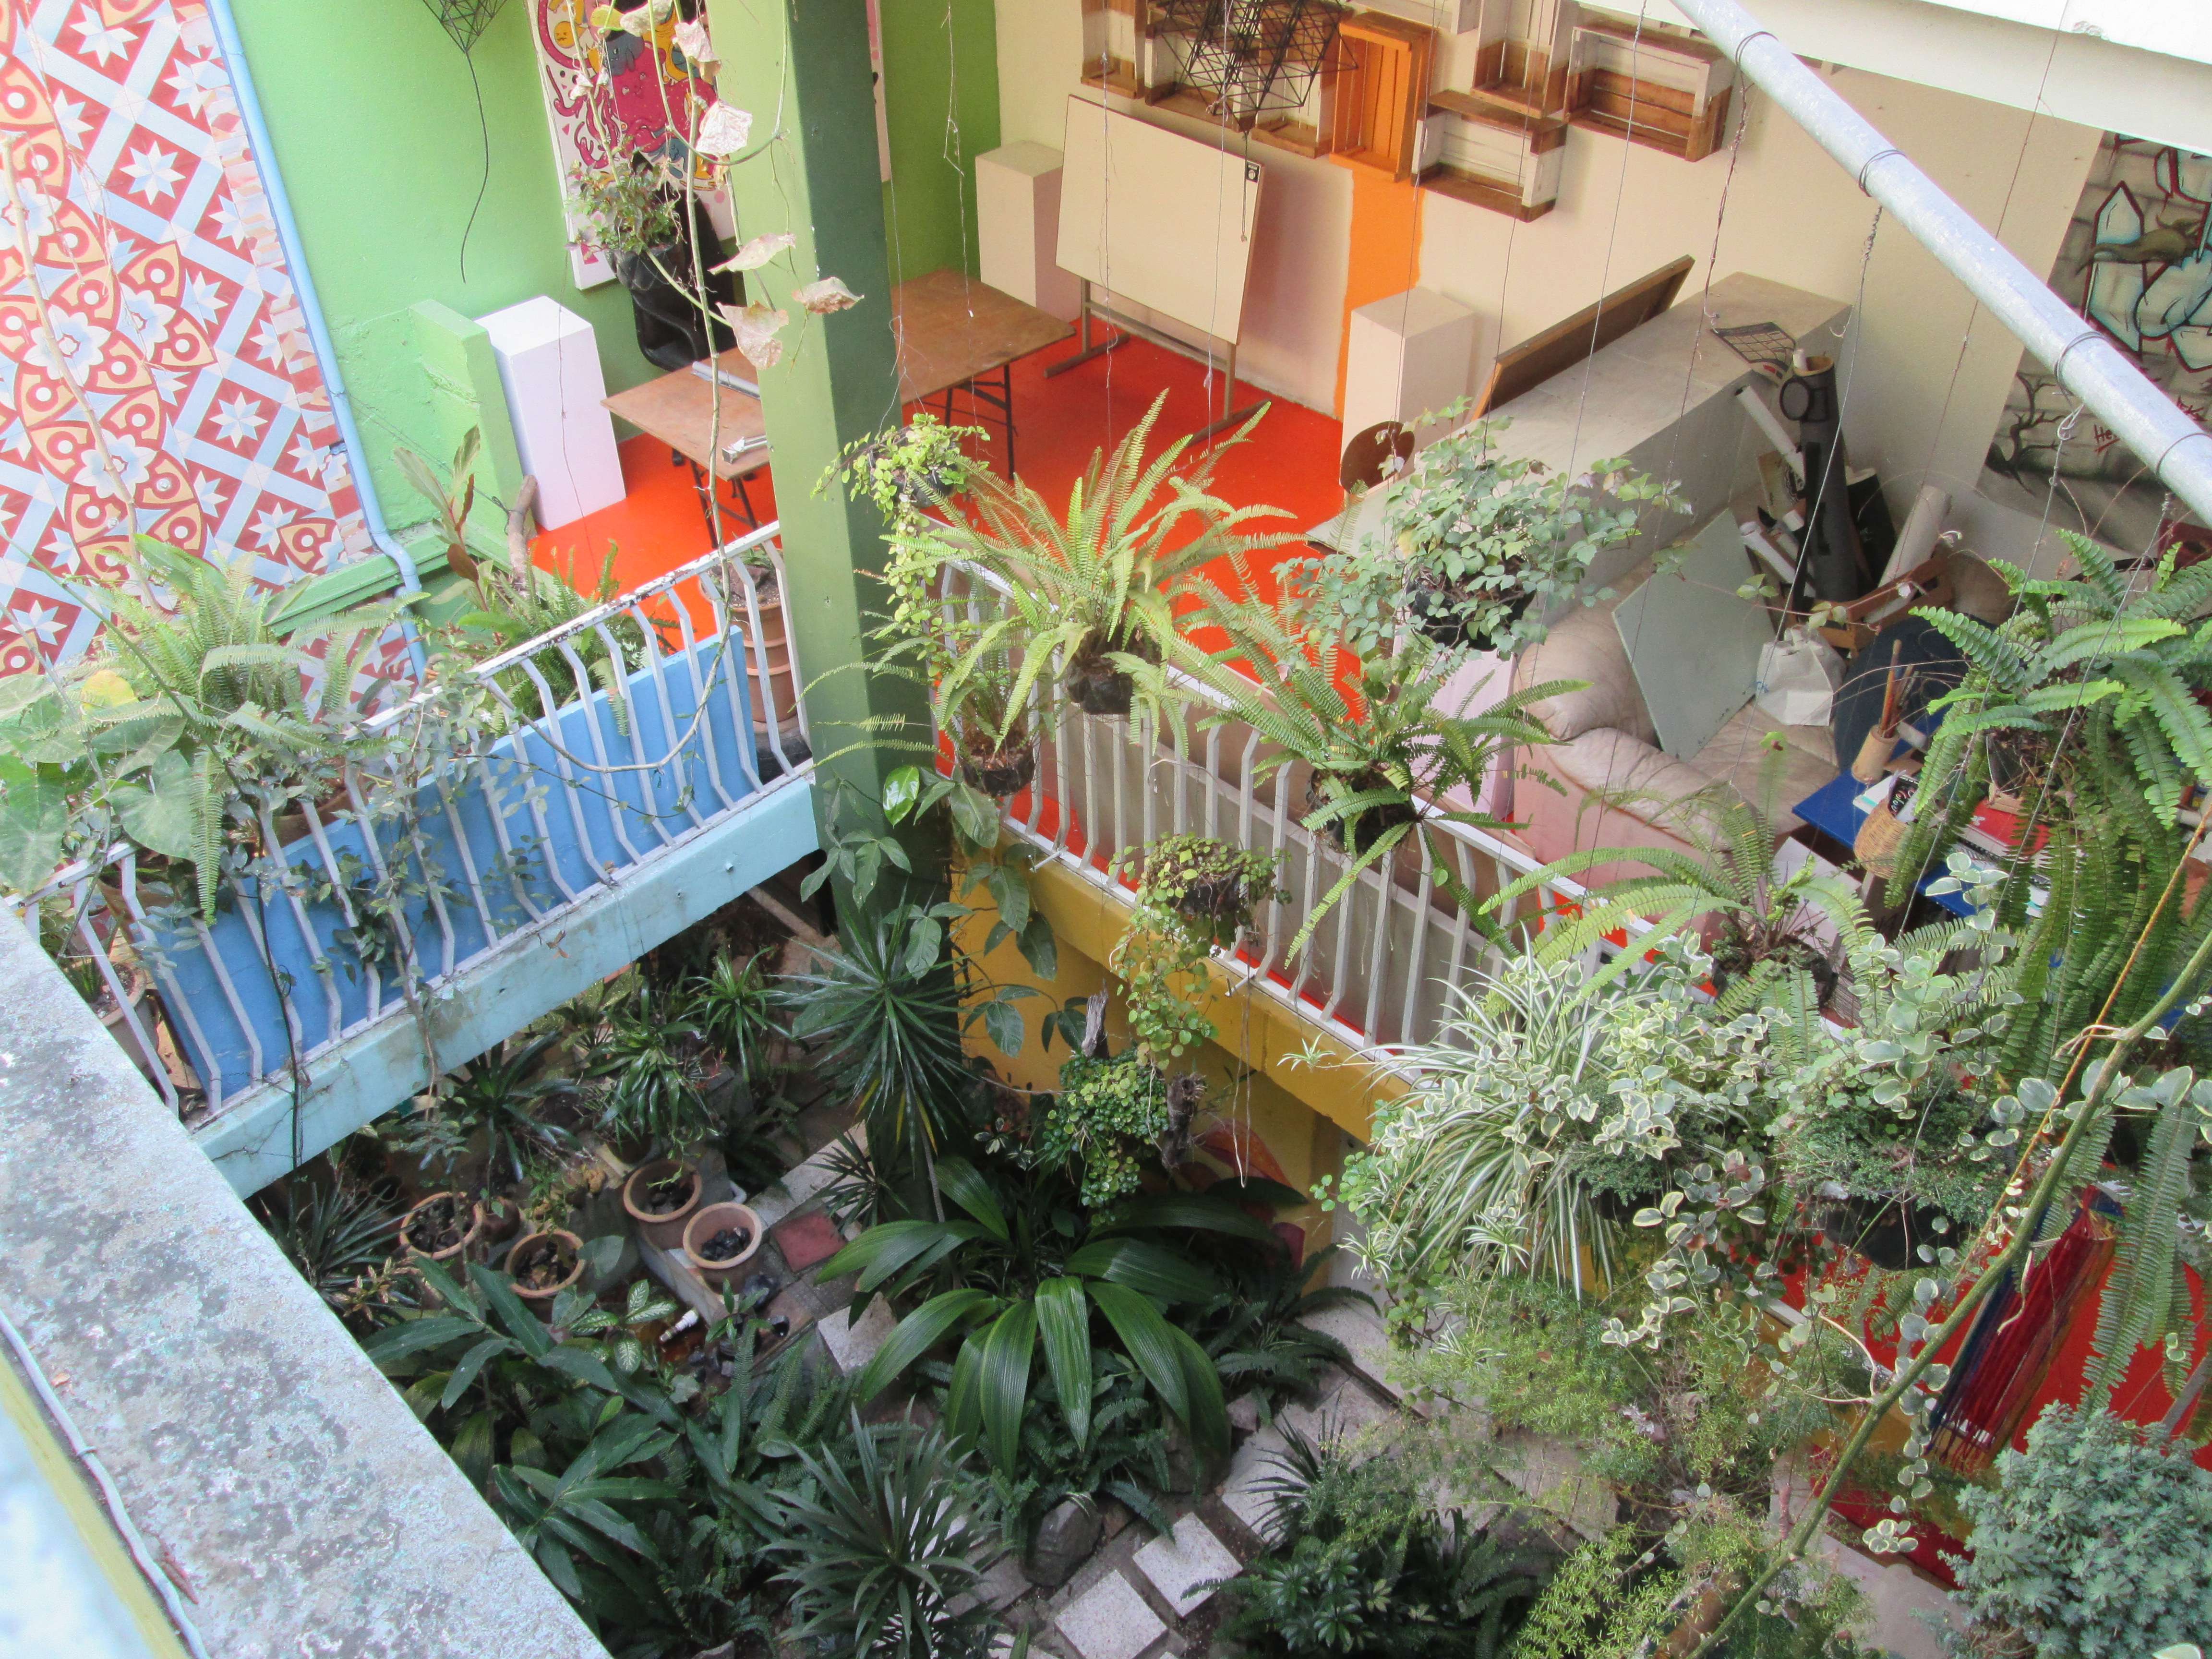 The courtyard, with many colorful mosaics and hanging plants